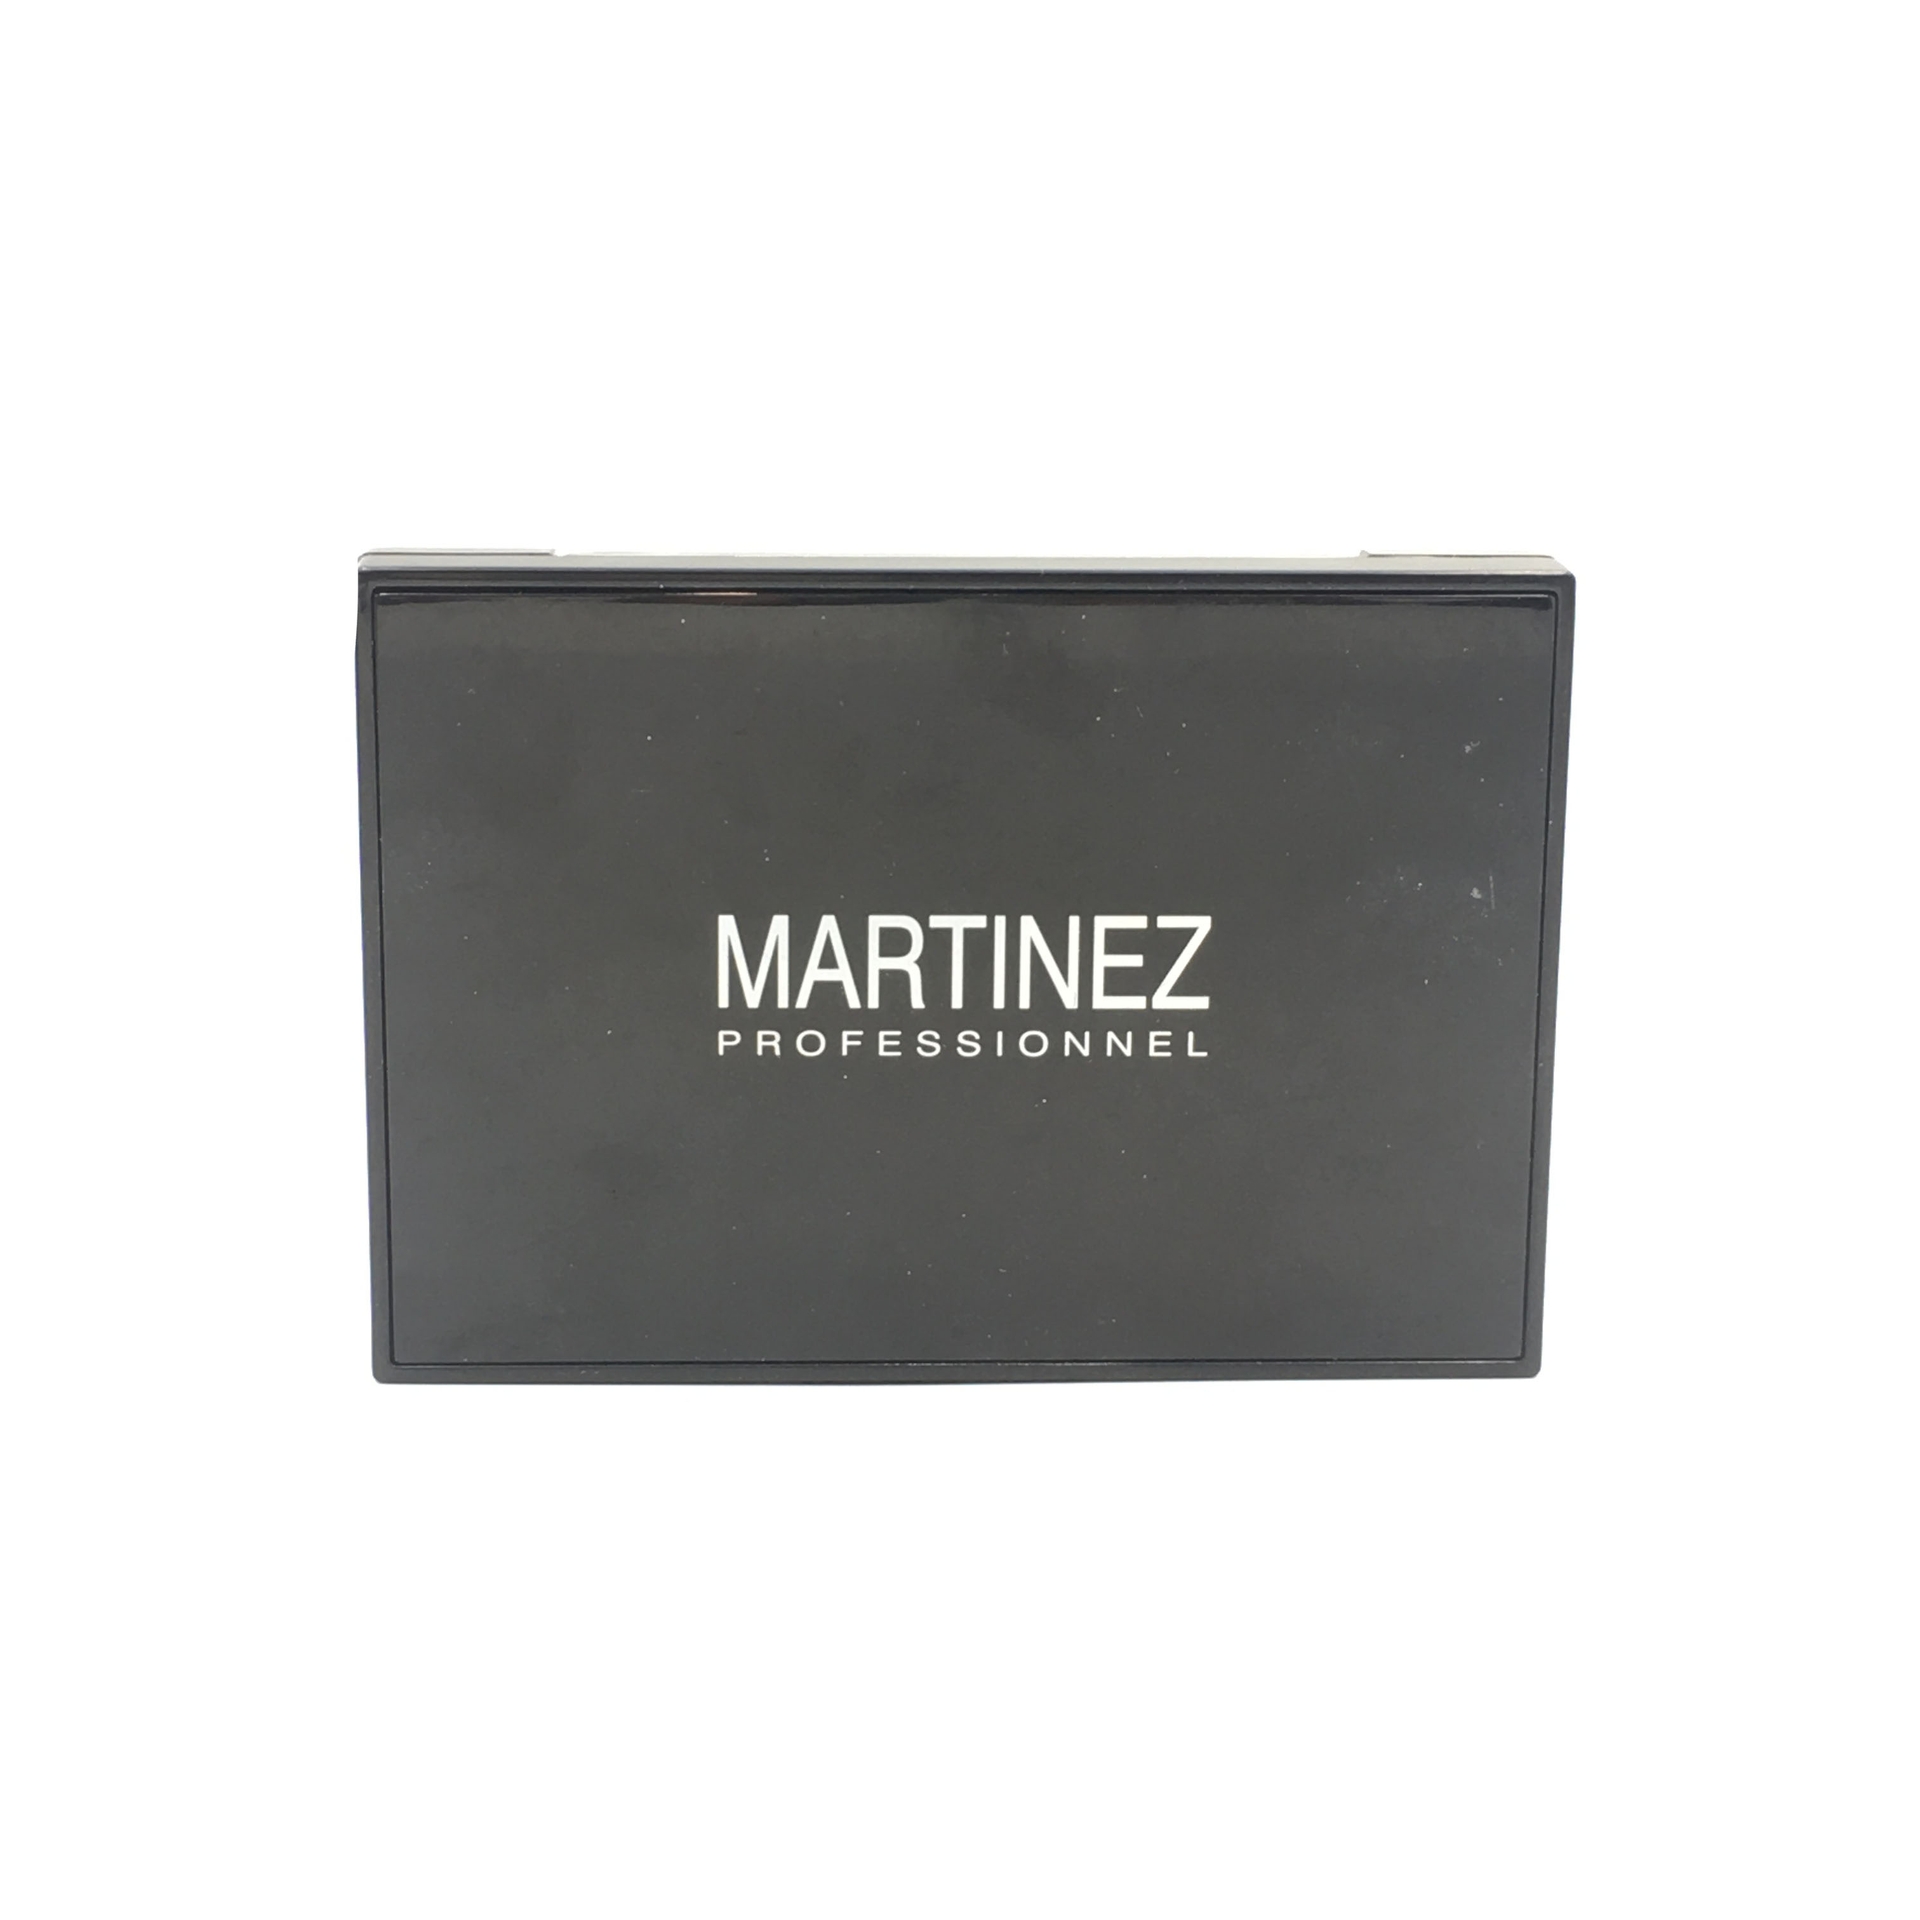 Private Collection Martinez Professionel Dramatic Glow Powder Foundation 01 Neutral Porcelain Faces